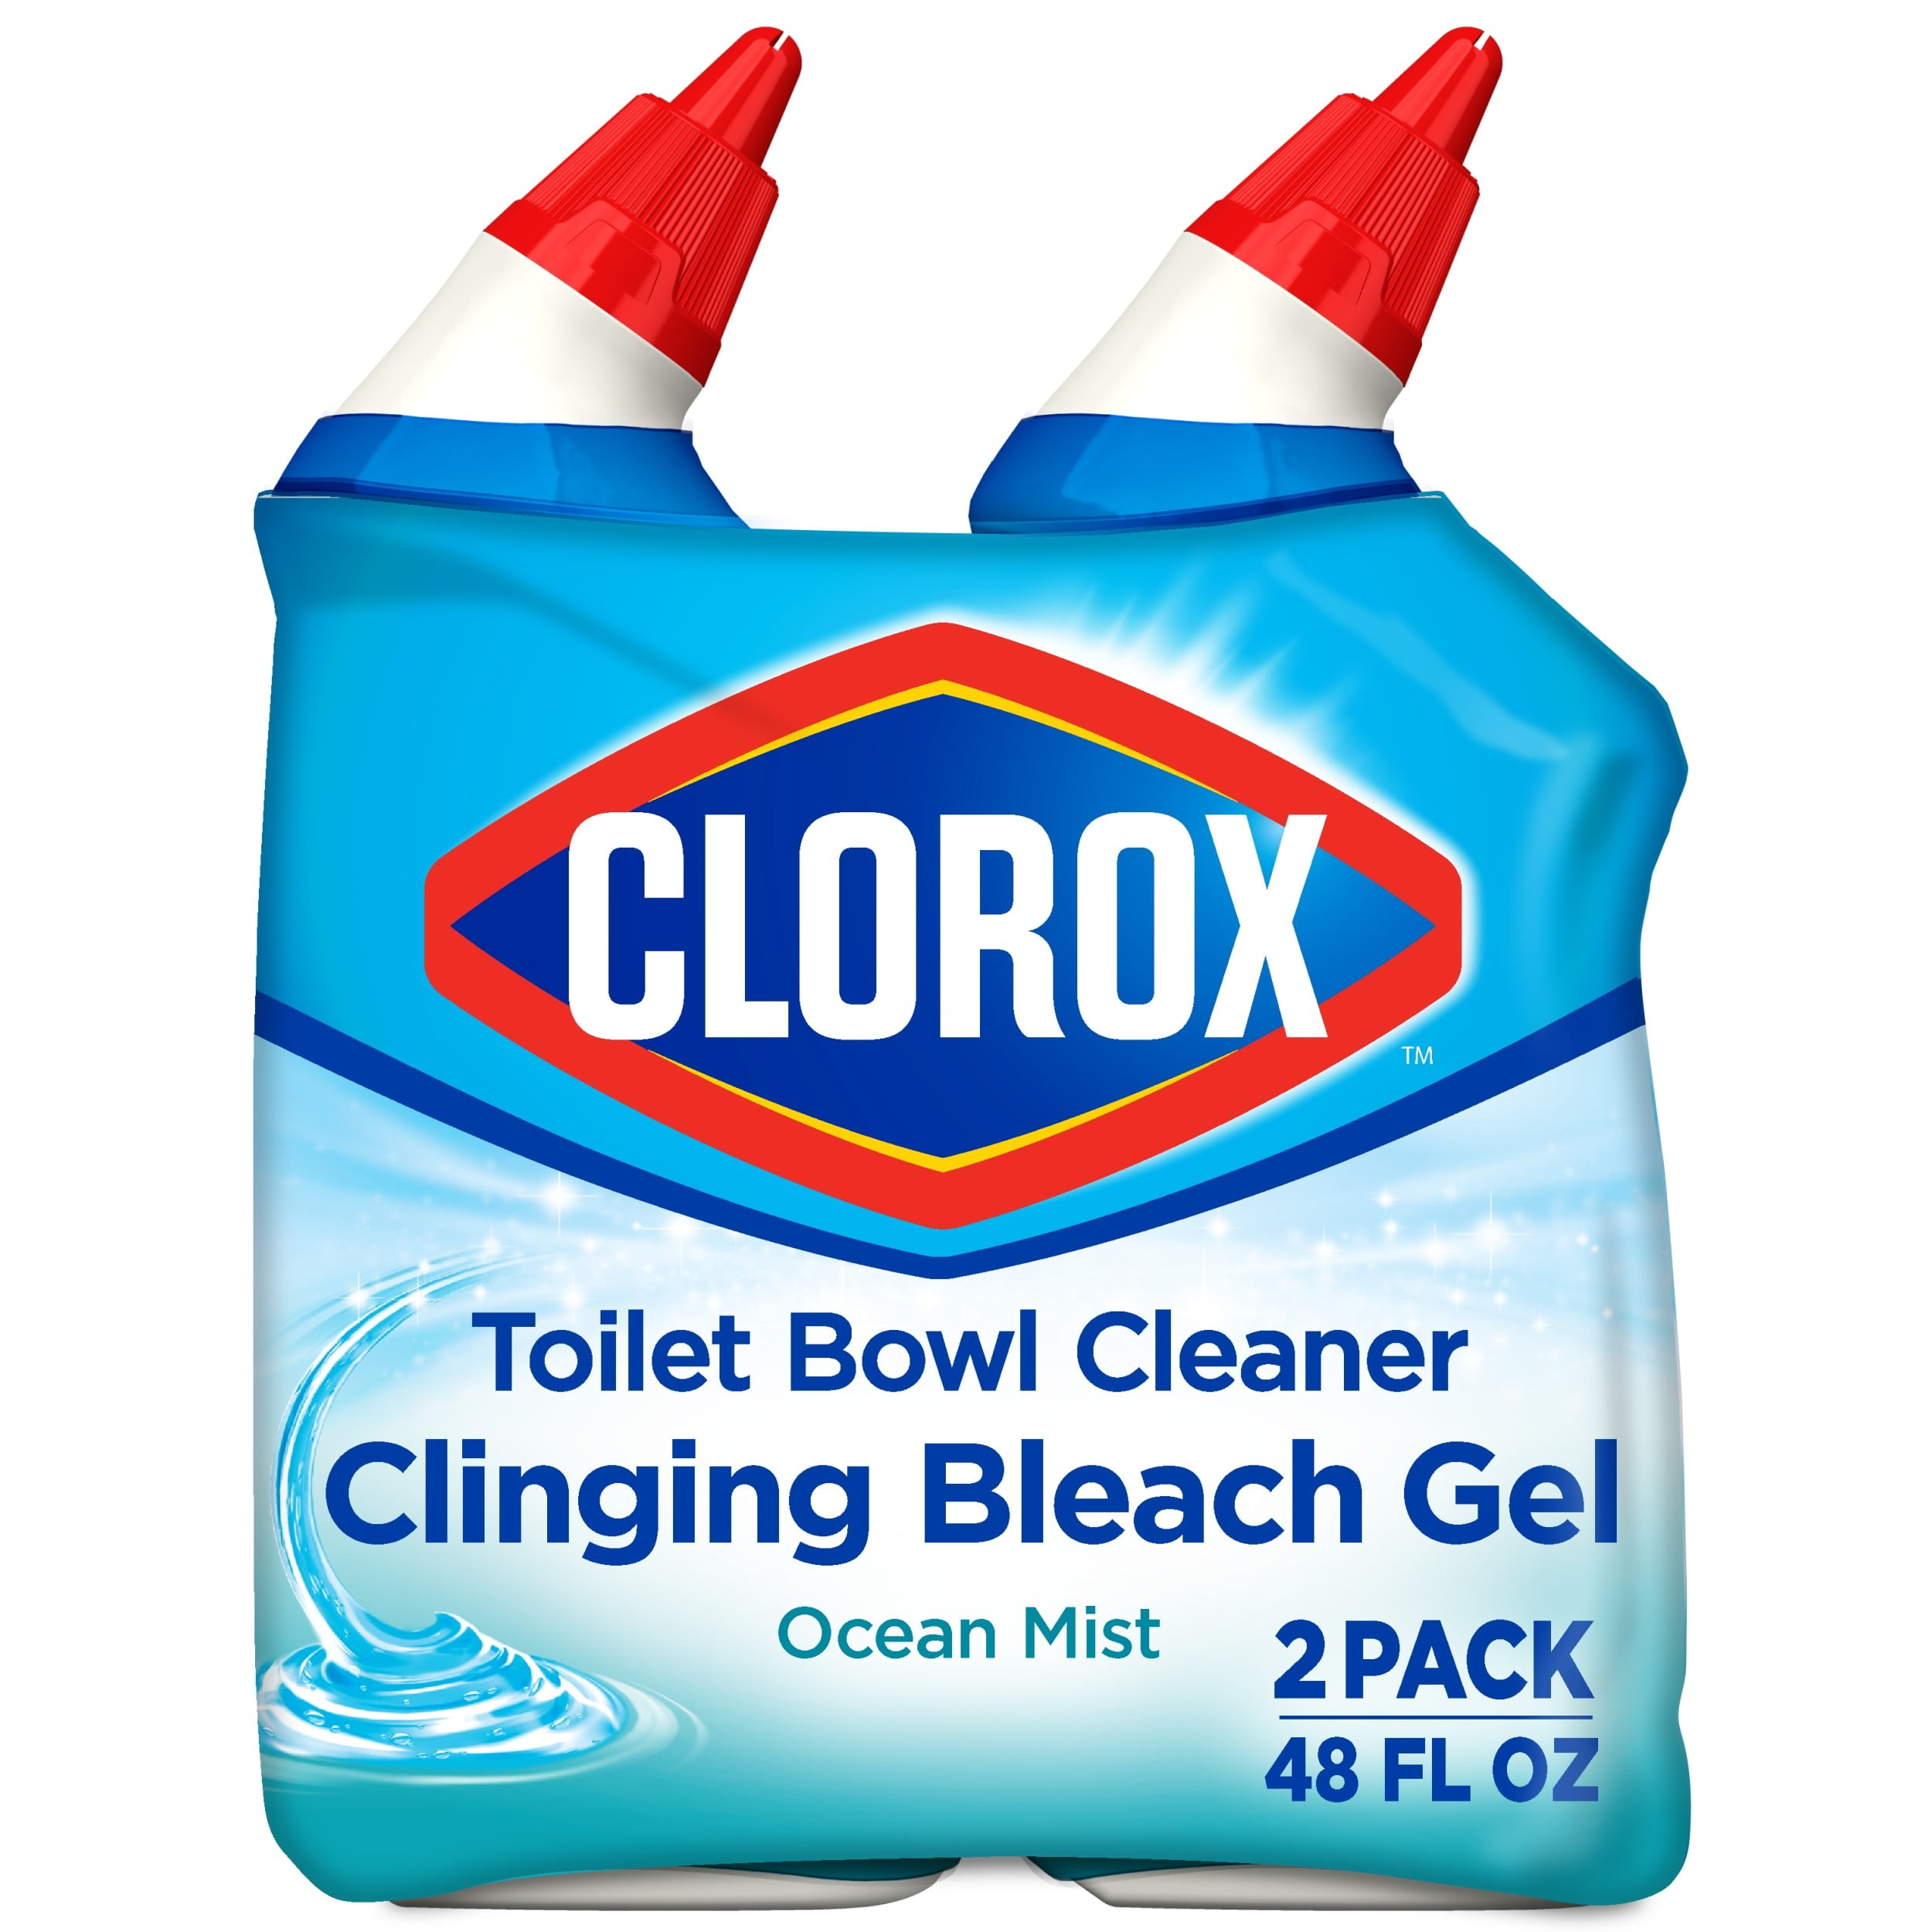 Clorox Toilet Bowl Cleaner Clinging Bleach Gel, Cool Wave, 24 Ounce, 2 Pack